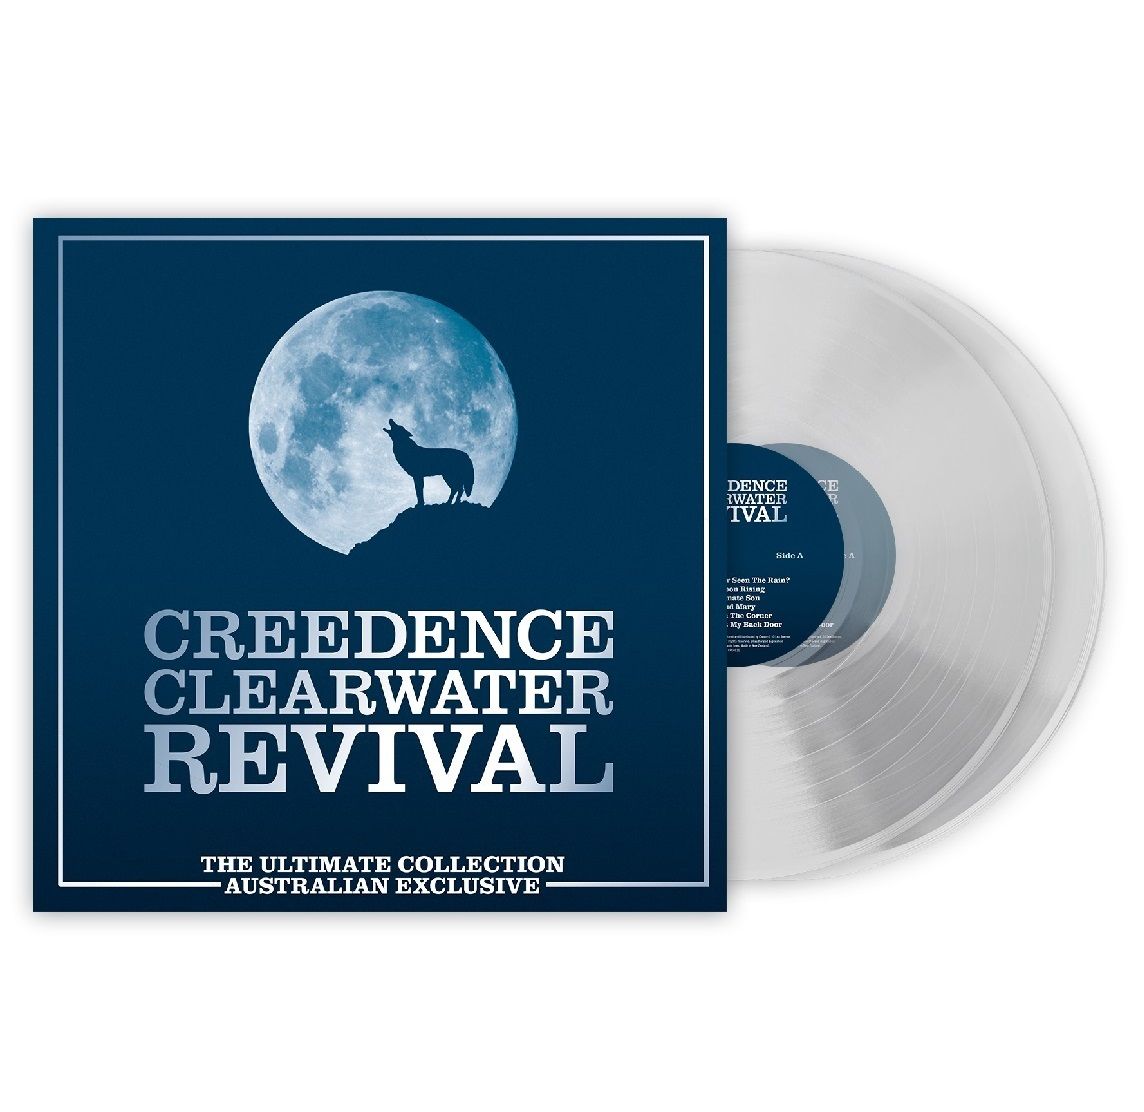 Creedence Clearwater Revival - Ultimate Collection, The (Aust. Exclusive 2LP Crystal Clear vinyl gatefold) - Vinyl - New